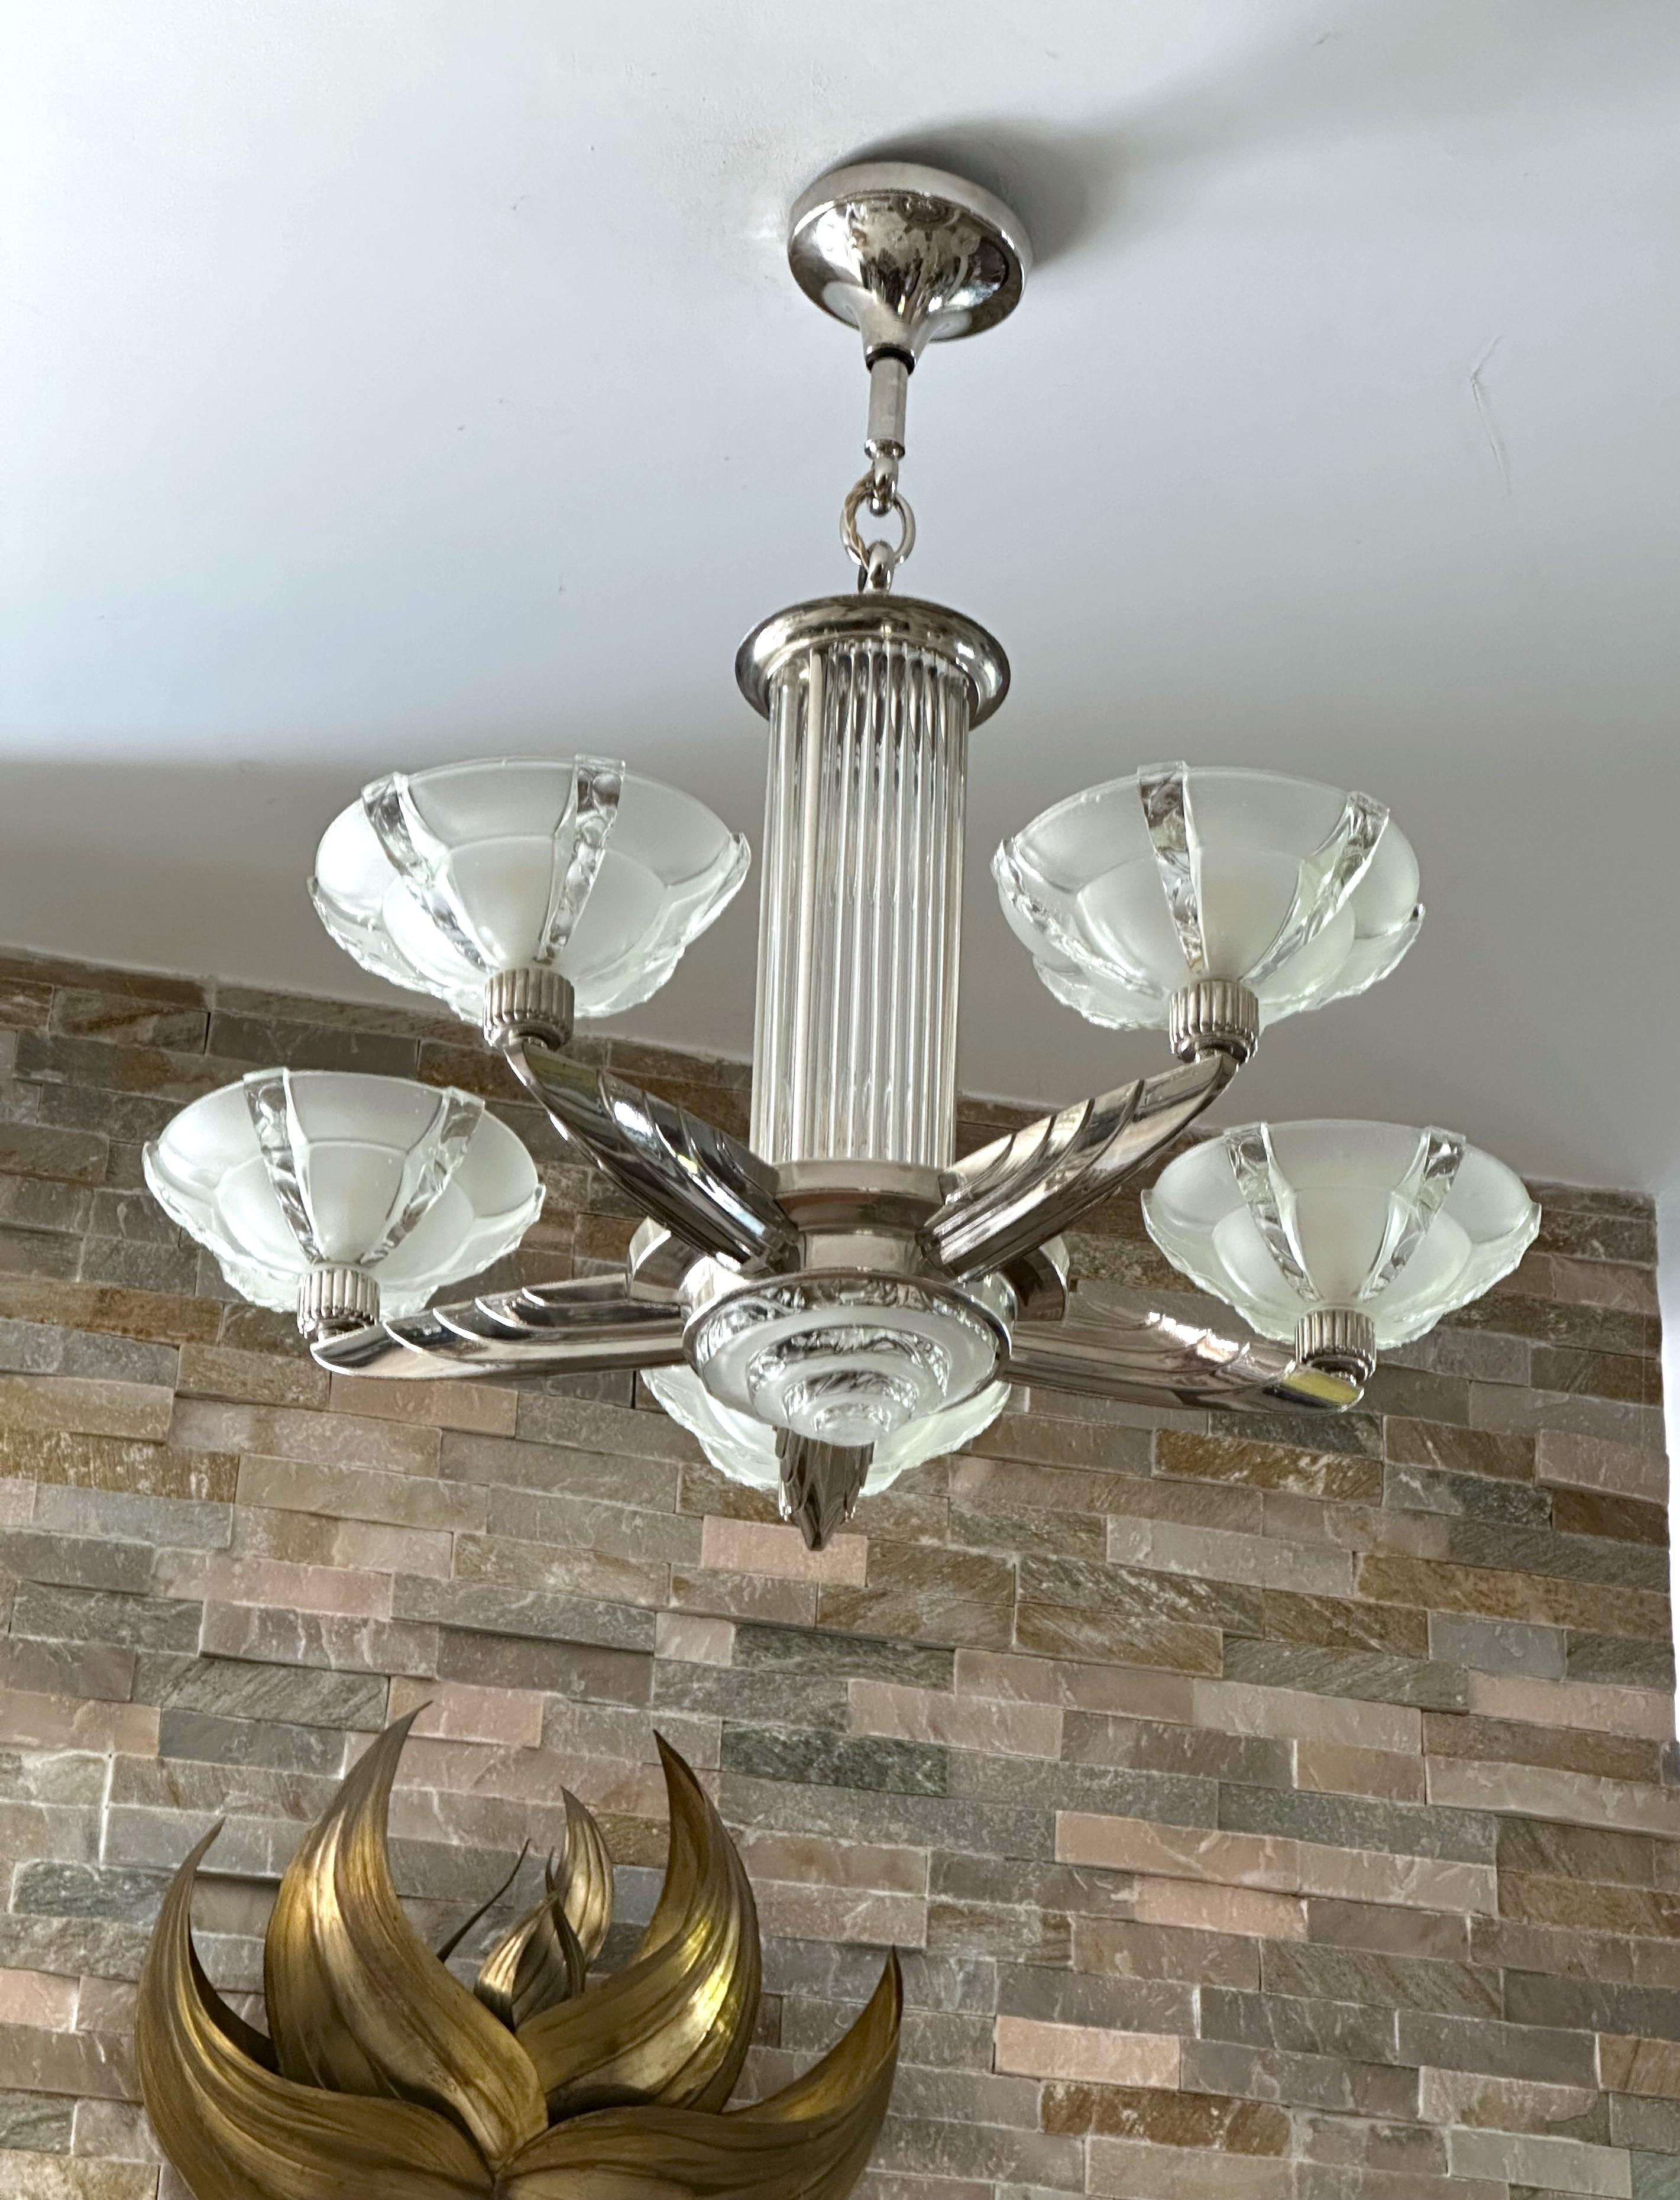 Art Deco Chandelier Petitot, France 1935.
original frosted glass shades.
fully restored.
new nickel plated.
rewired. holds 7 b22 bulbs
signed.